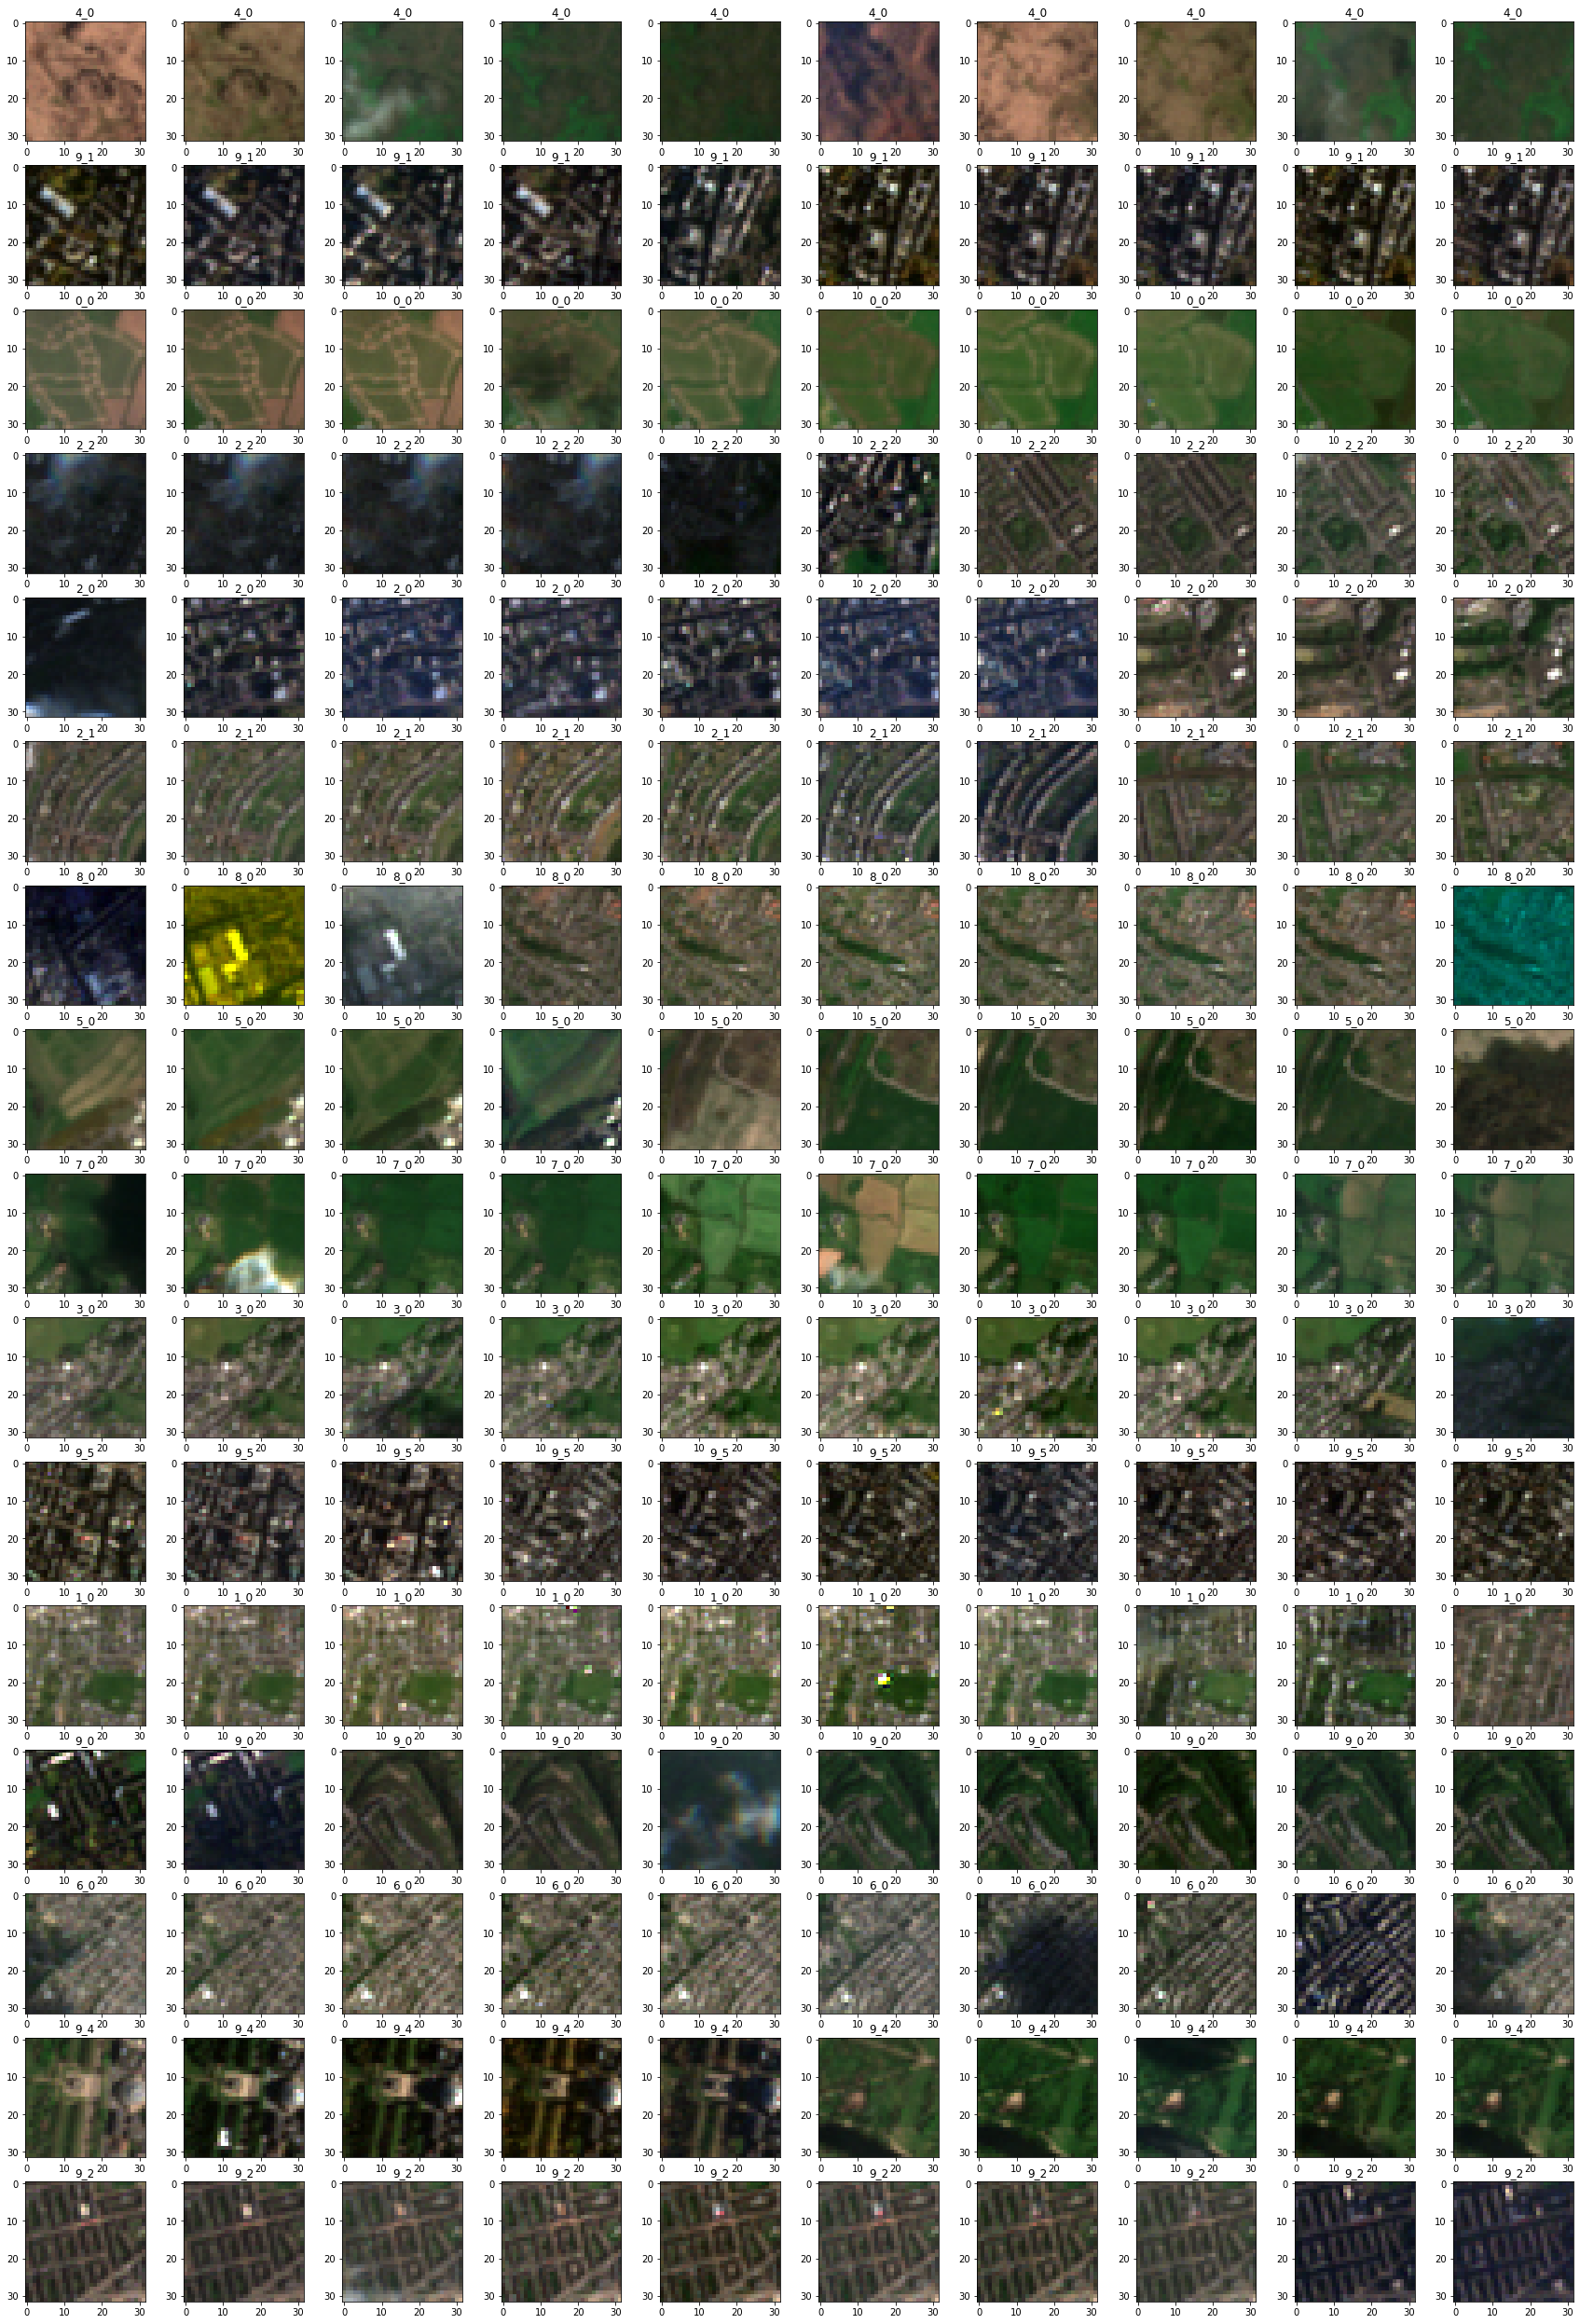 ../_images/check_temporal_tiles_7_0.png